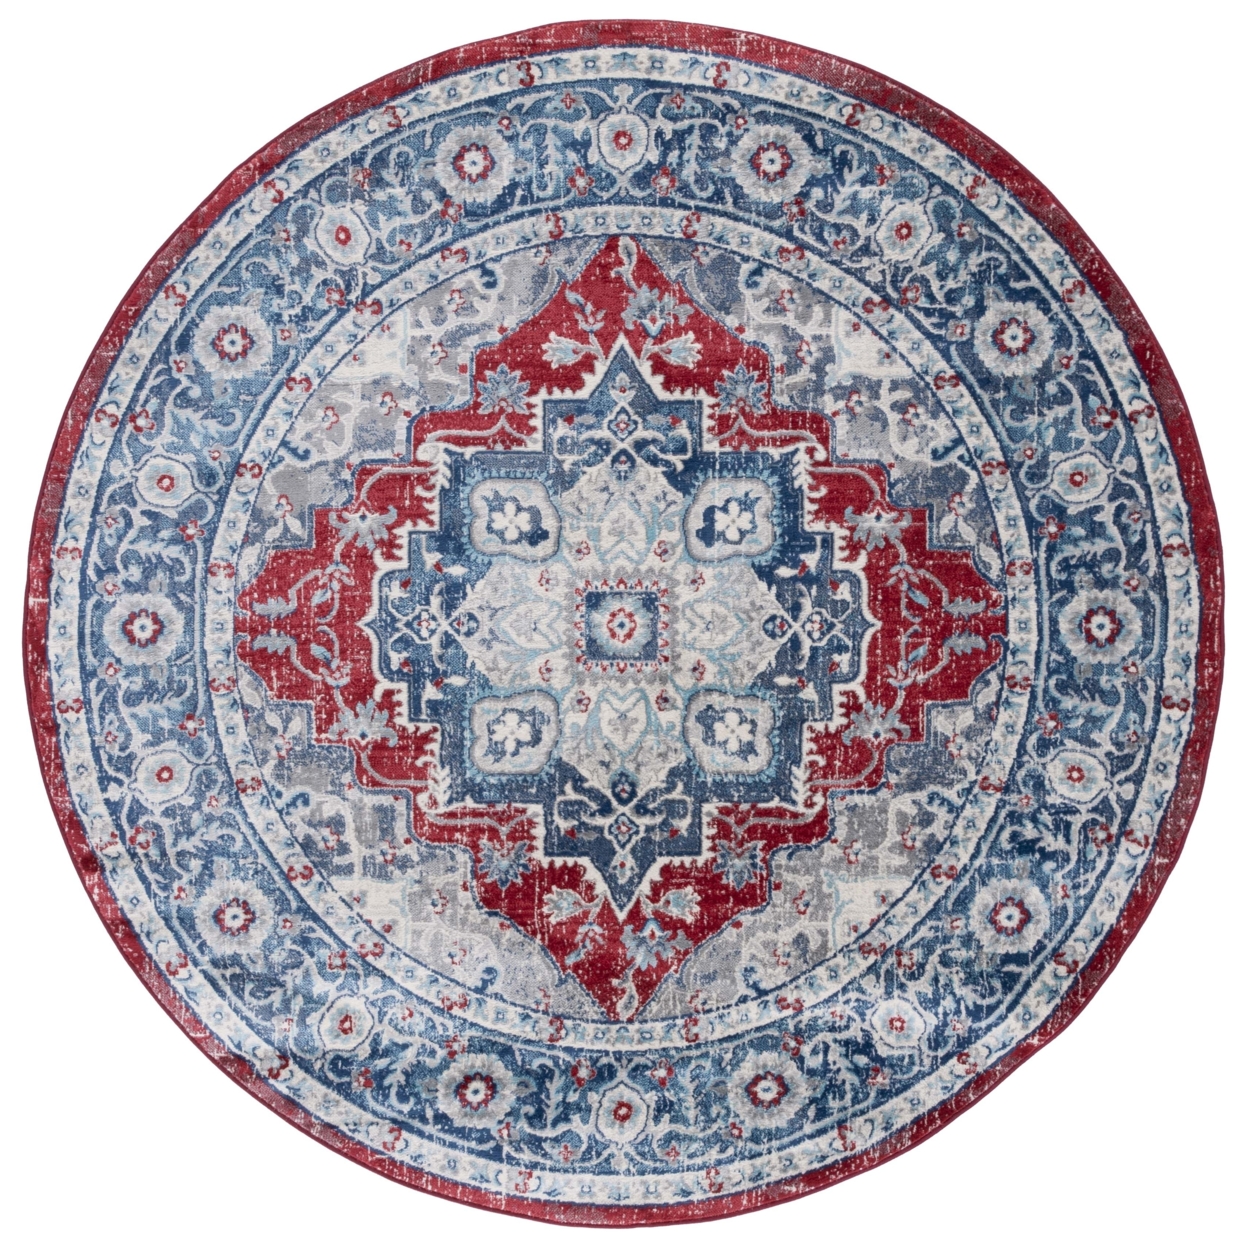 SAFAVIEH Brentwood Collection BNT837N Blue / Red Rug - 2' X 9'